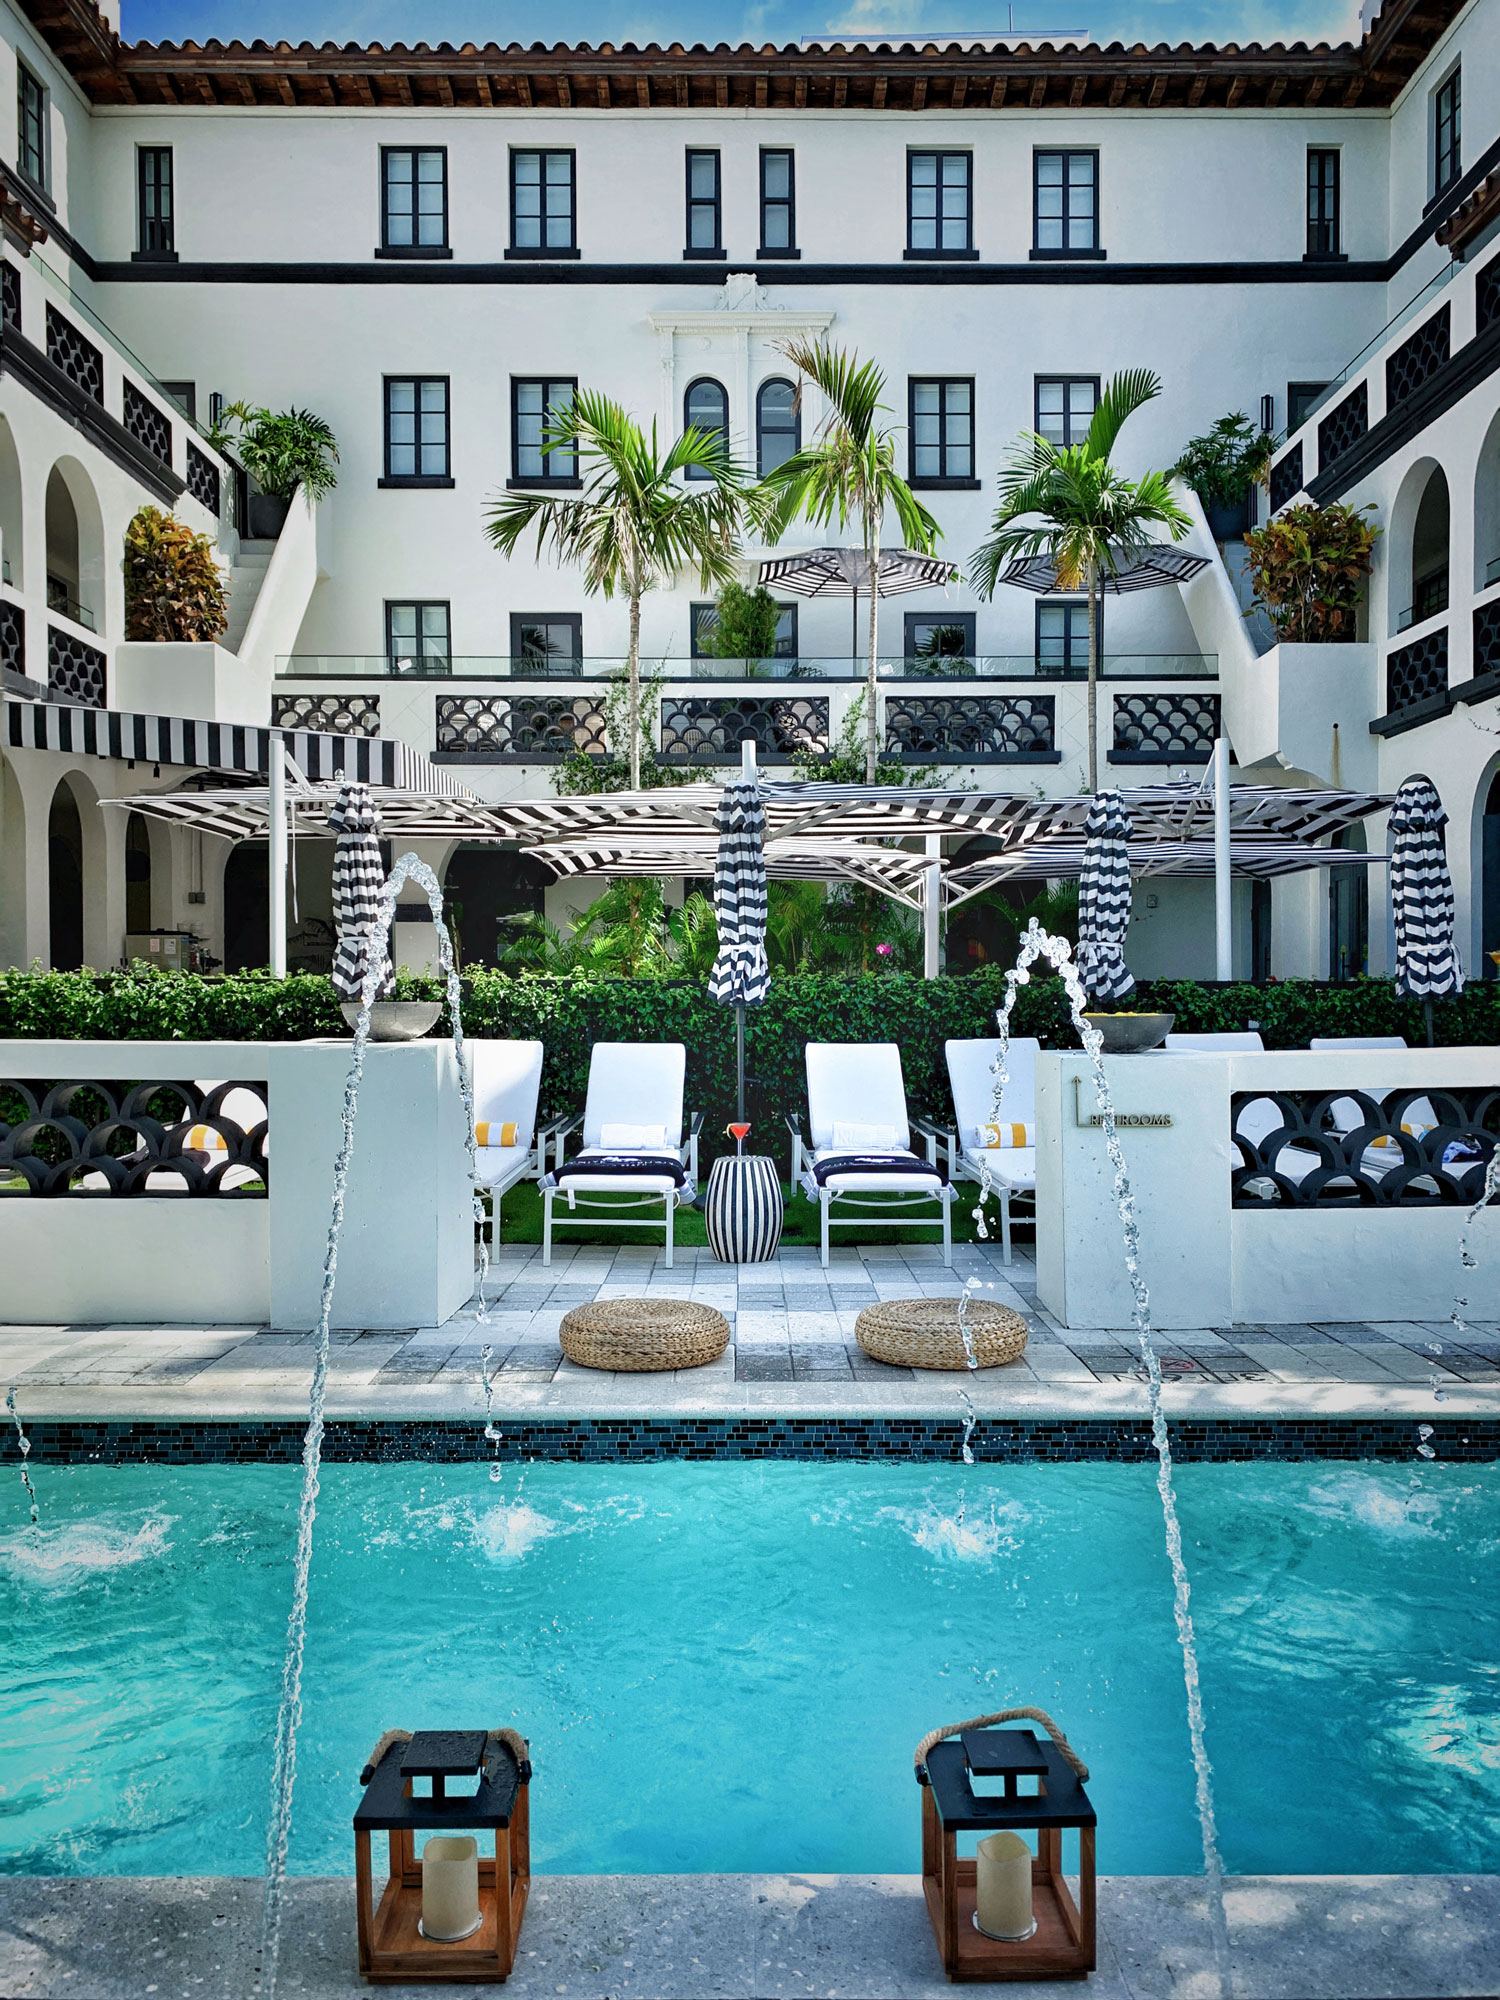 new pool in the courtyard of White Elephant Palm Beach incorporates two historic wing walls as privacy screens for sunbathers